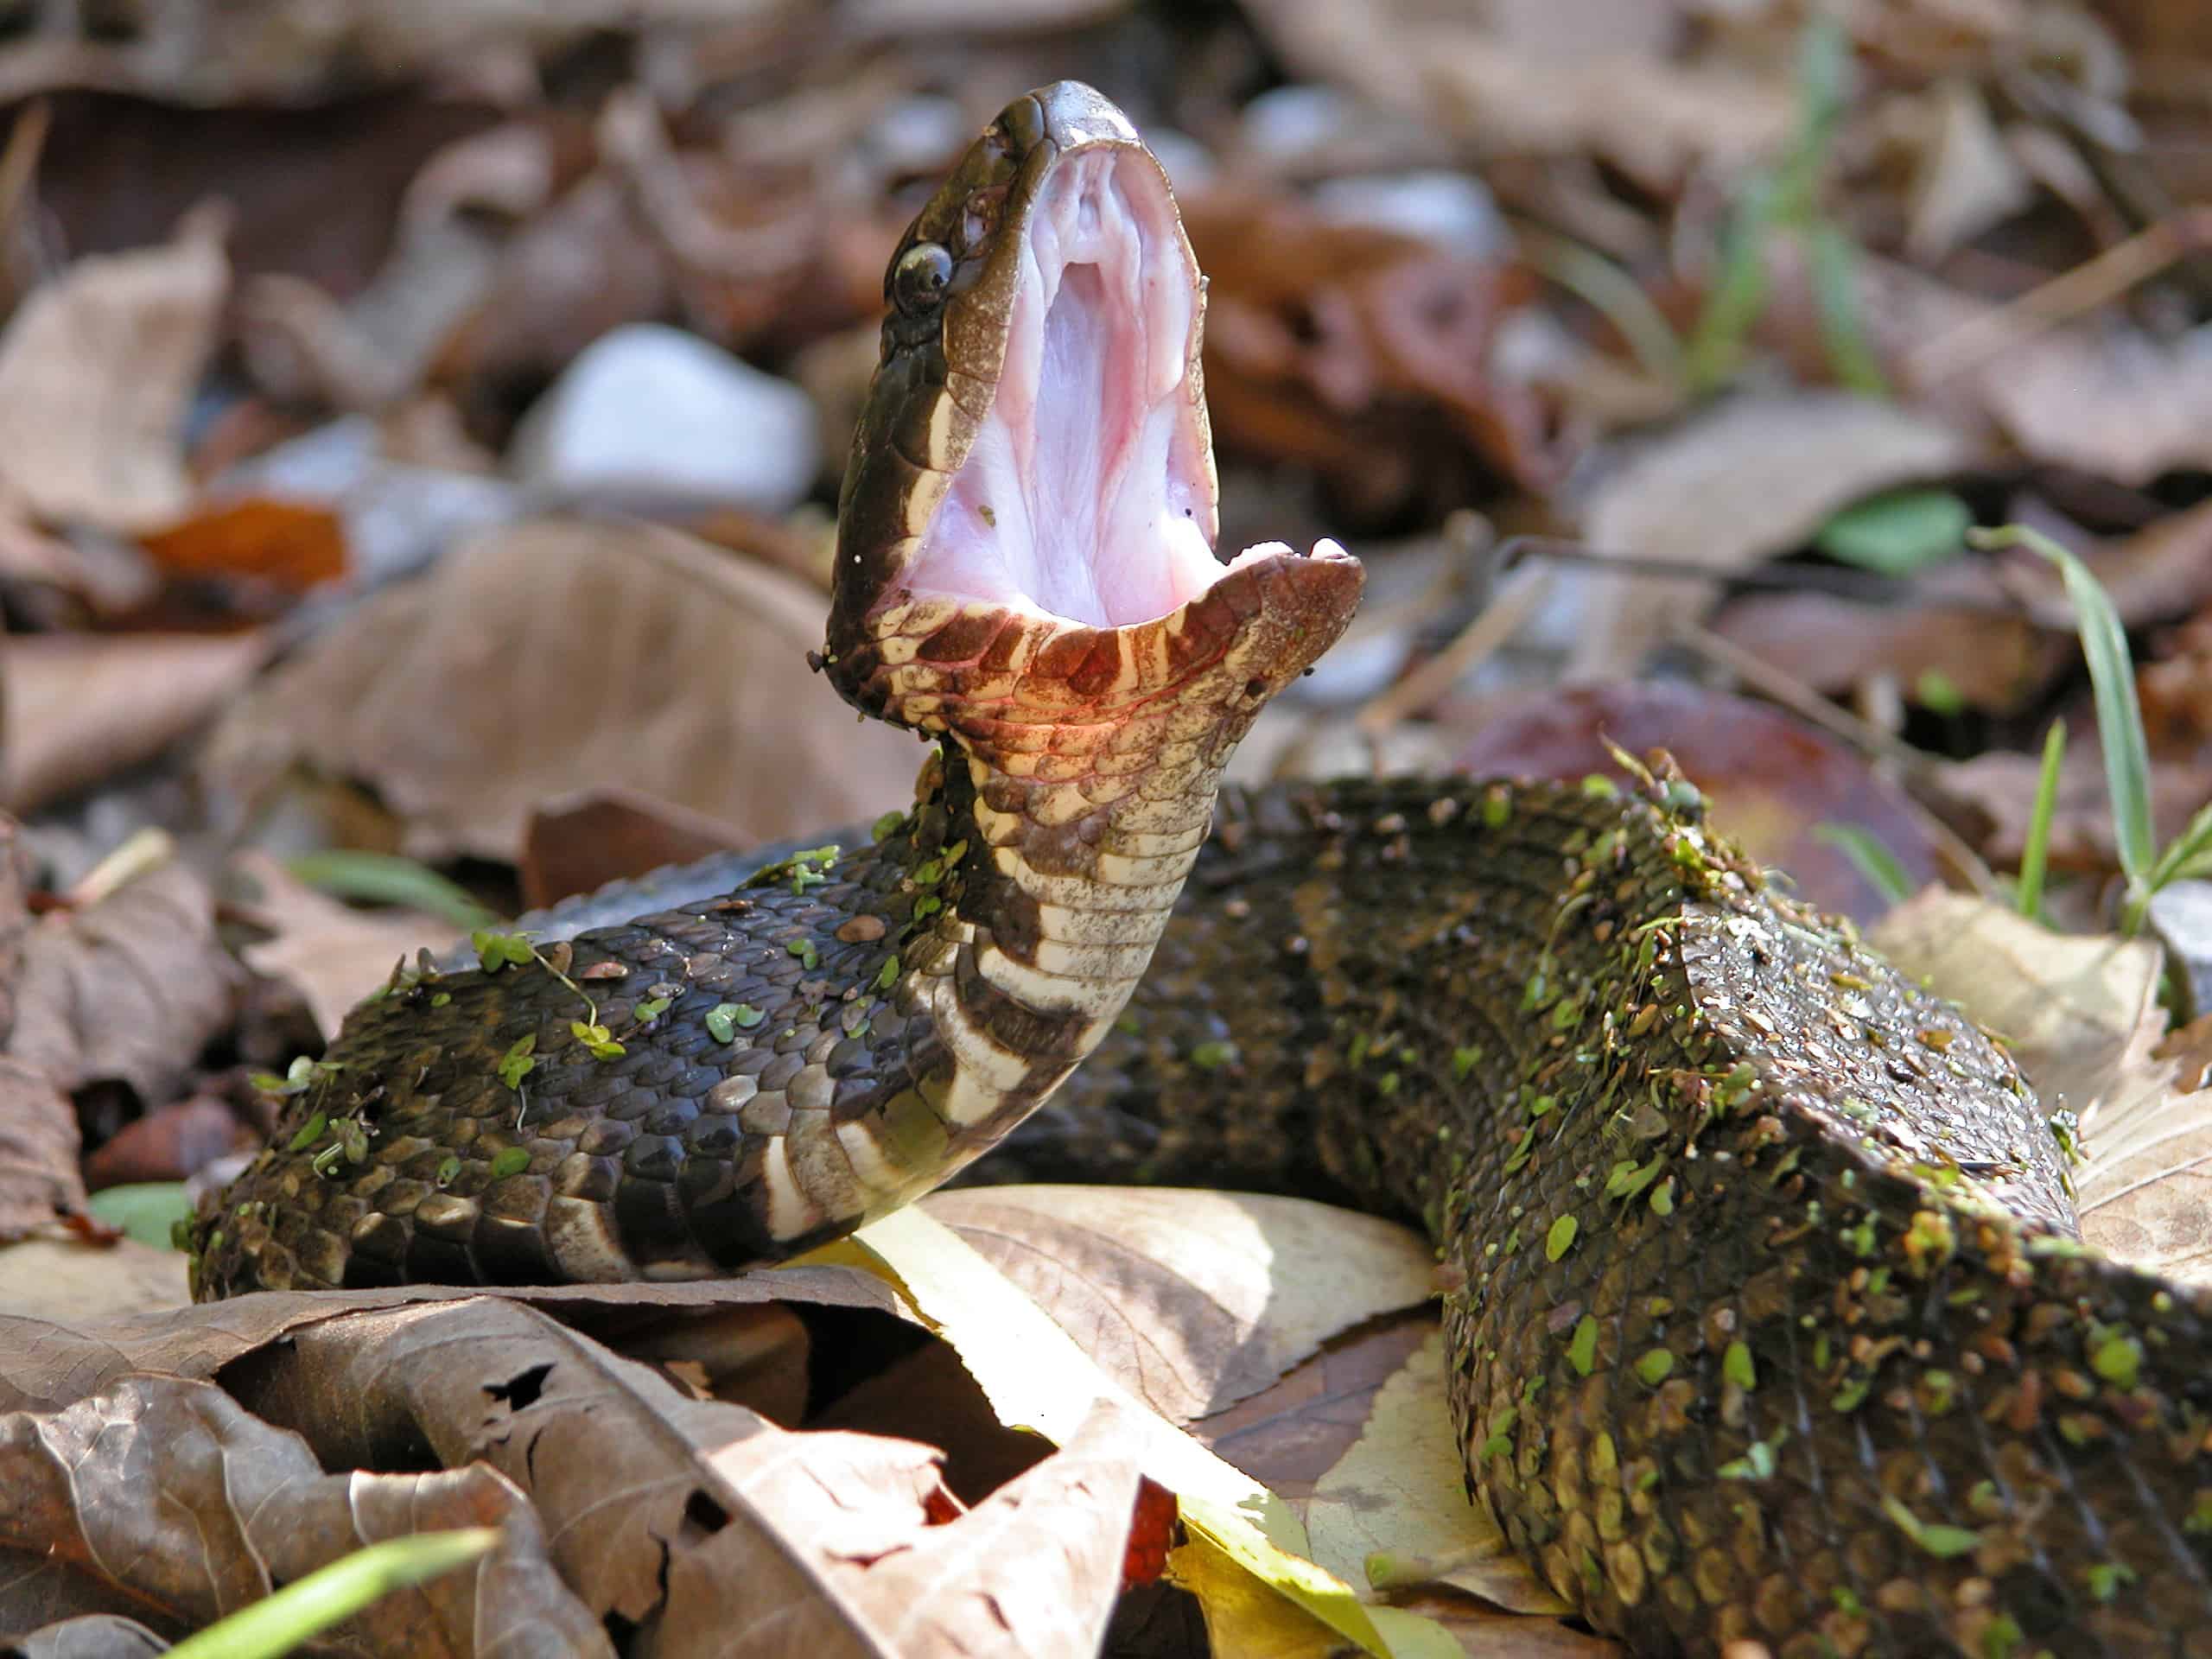 Cottonmouth Snake Showing its Cotton Mouth